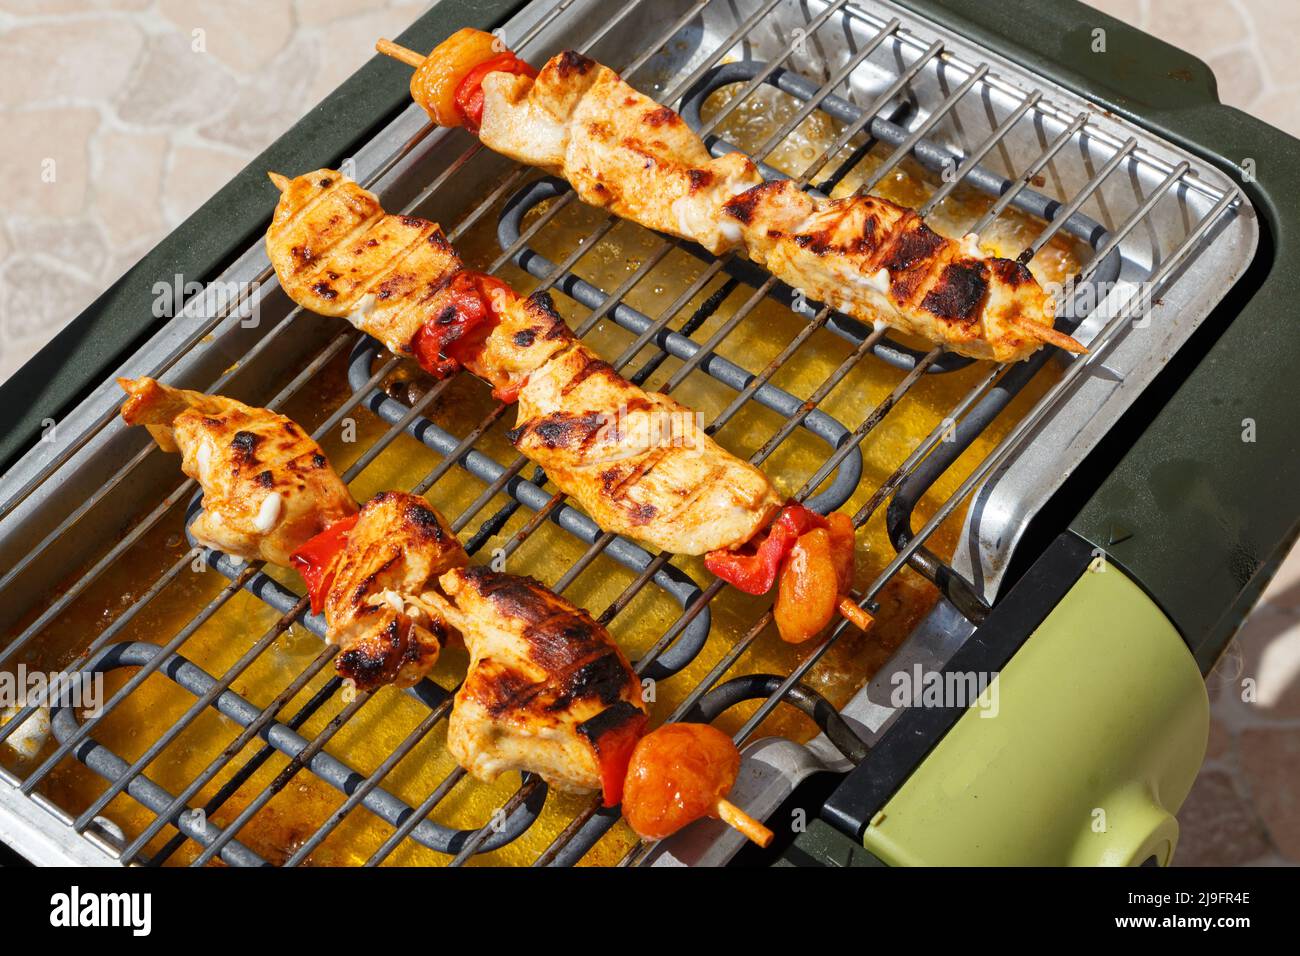 Marinated chicken brochette on the grid of an electric barbecue during summer Stock Photo